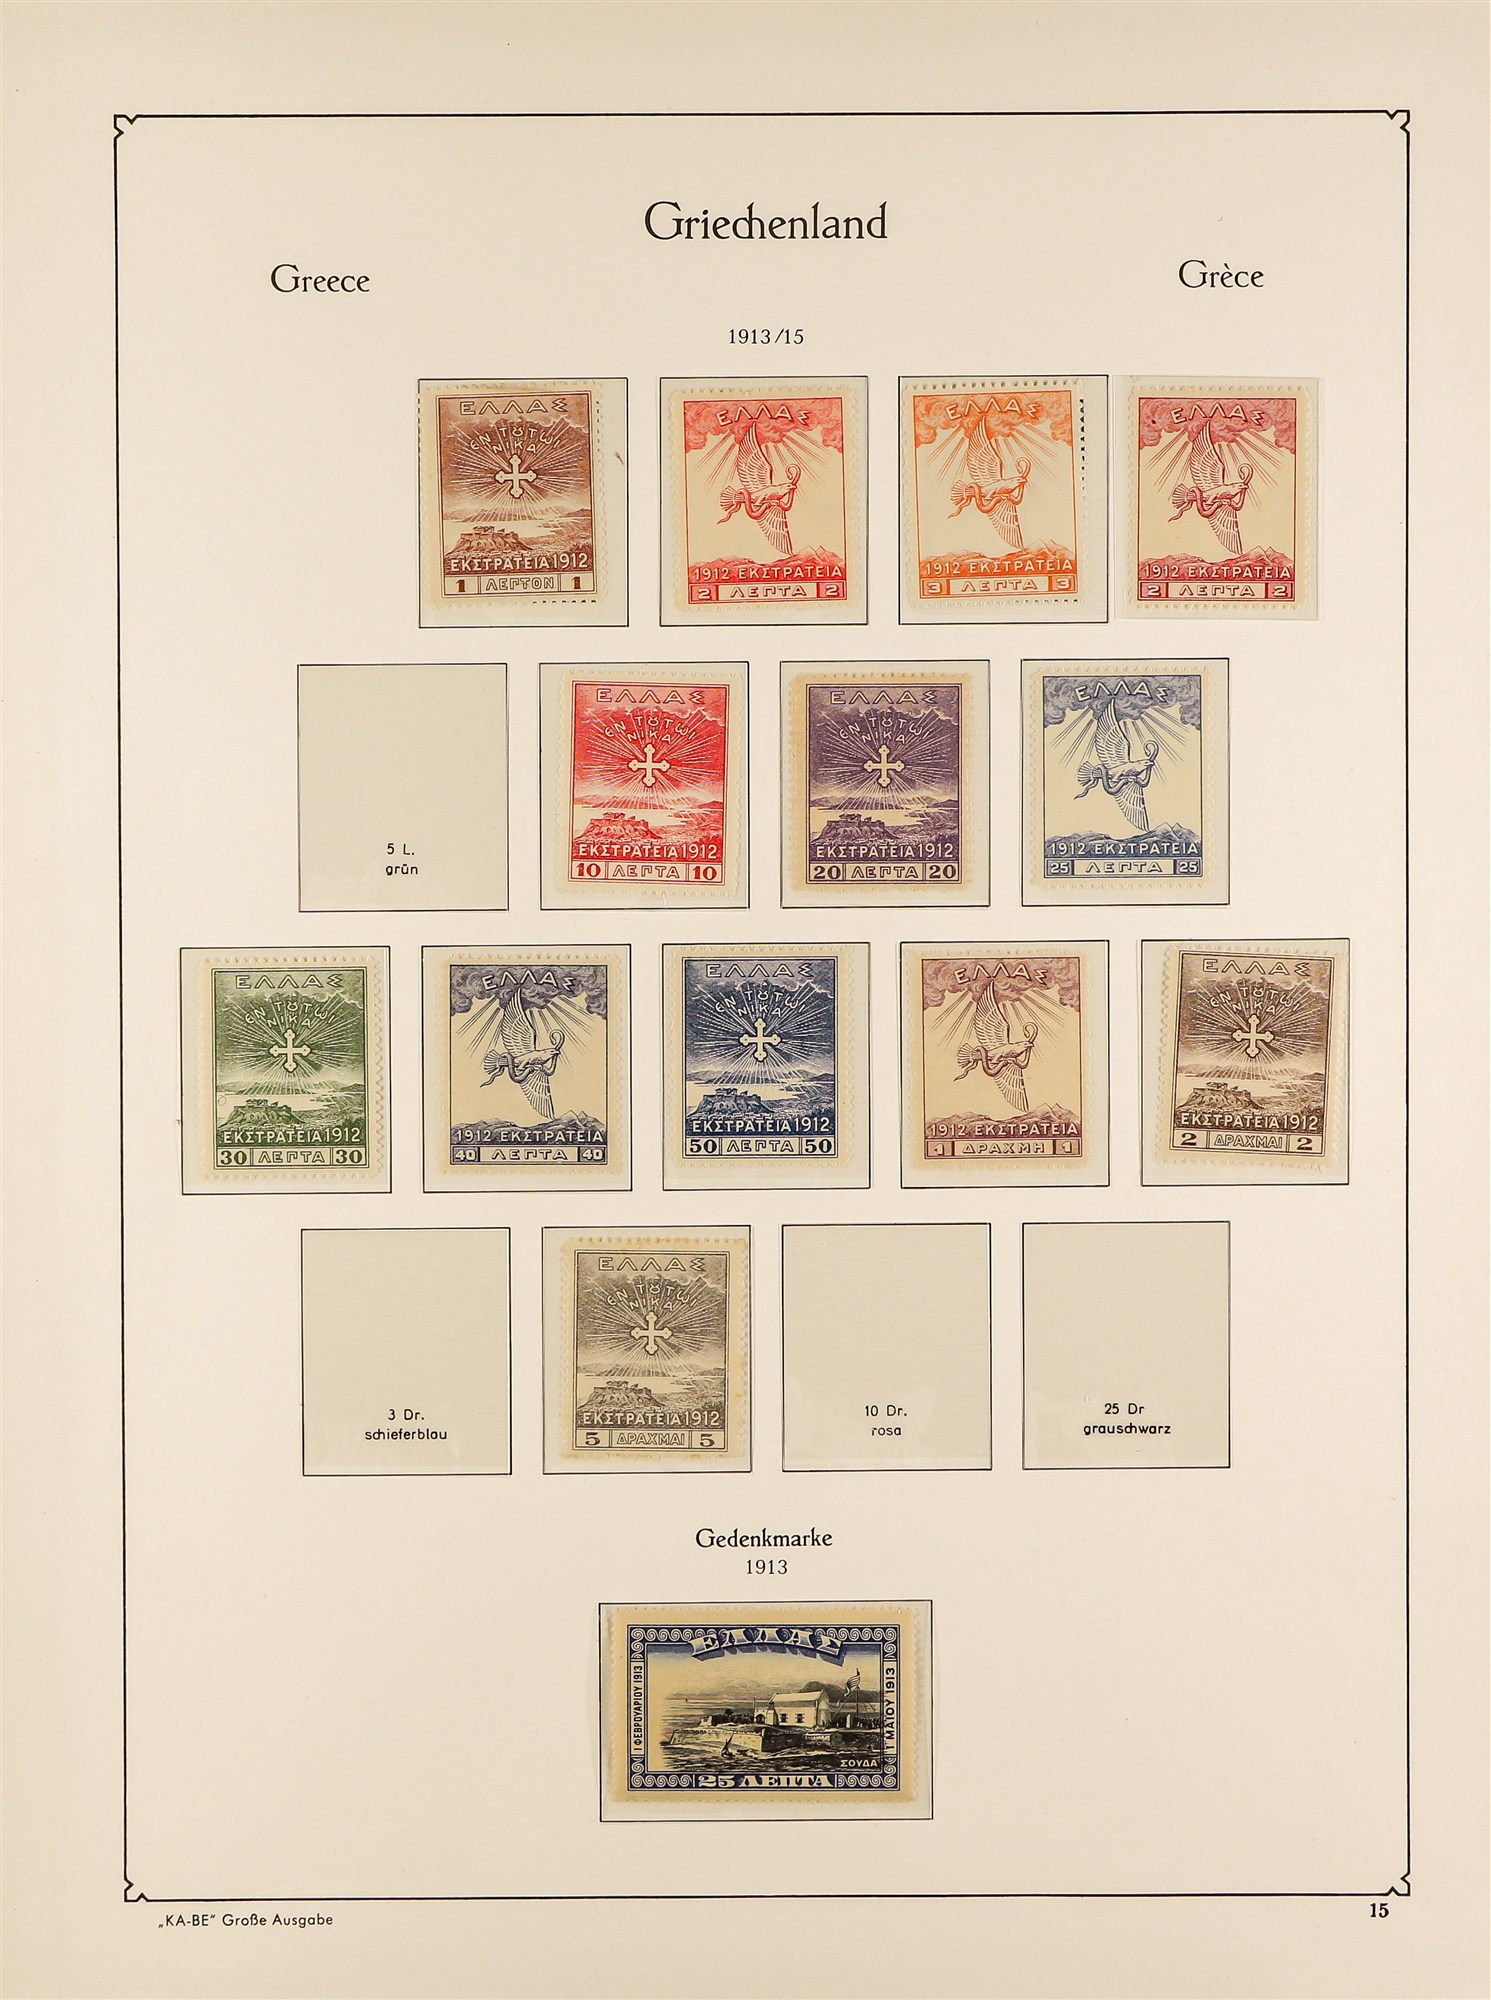 GREECE 1901 - 1930 MINT COLLECTION of 200+ stamps on Ka-Be hingeless album pages, comprehensive incl - Image 4 of 14